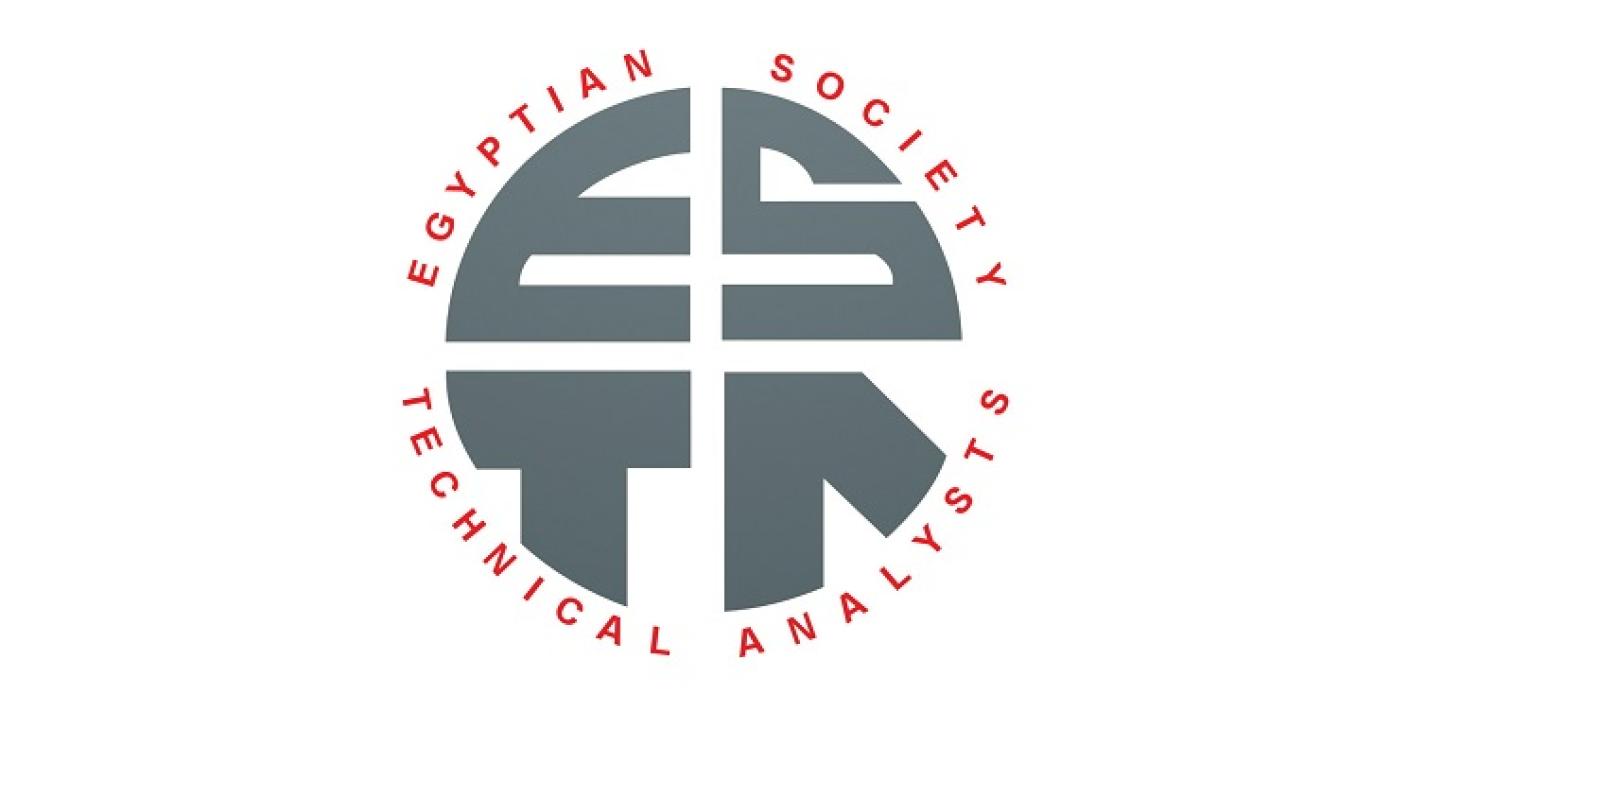 Egyptian Society for Technical Analysts (ESTA)